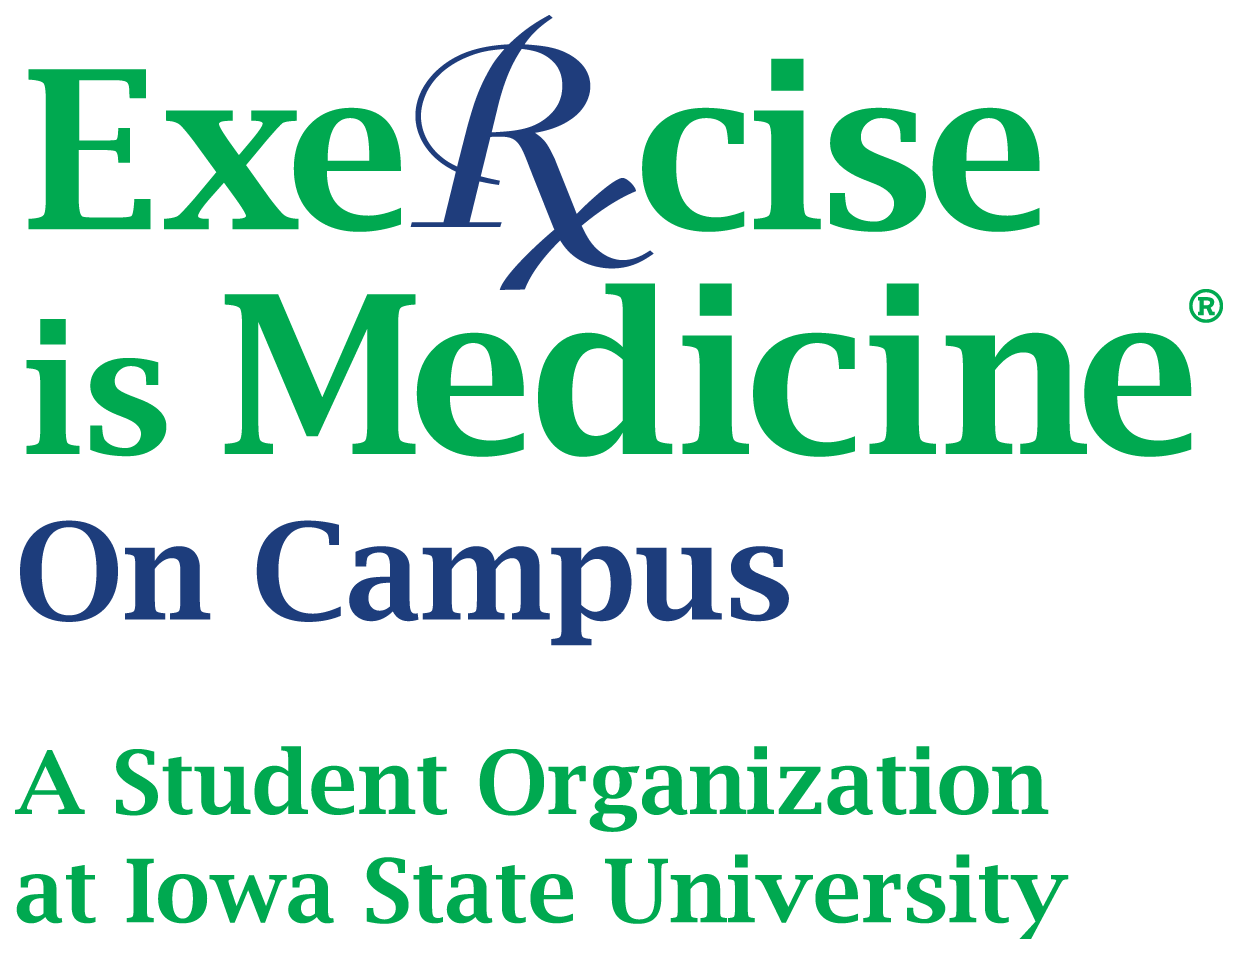 Exercise is Medicine On Campus Header